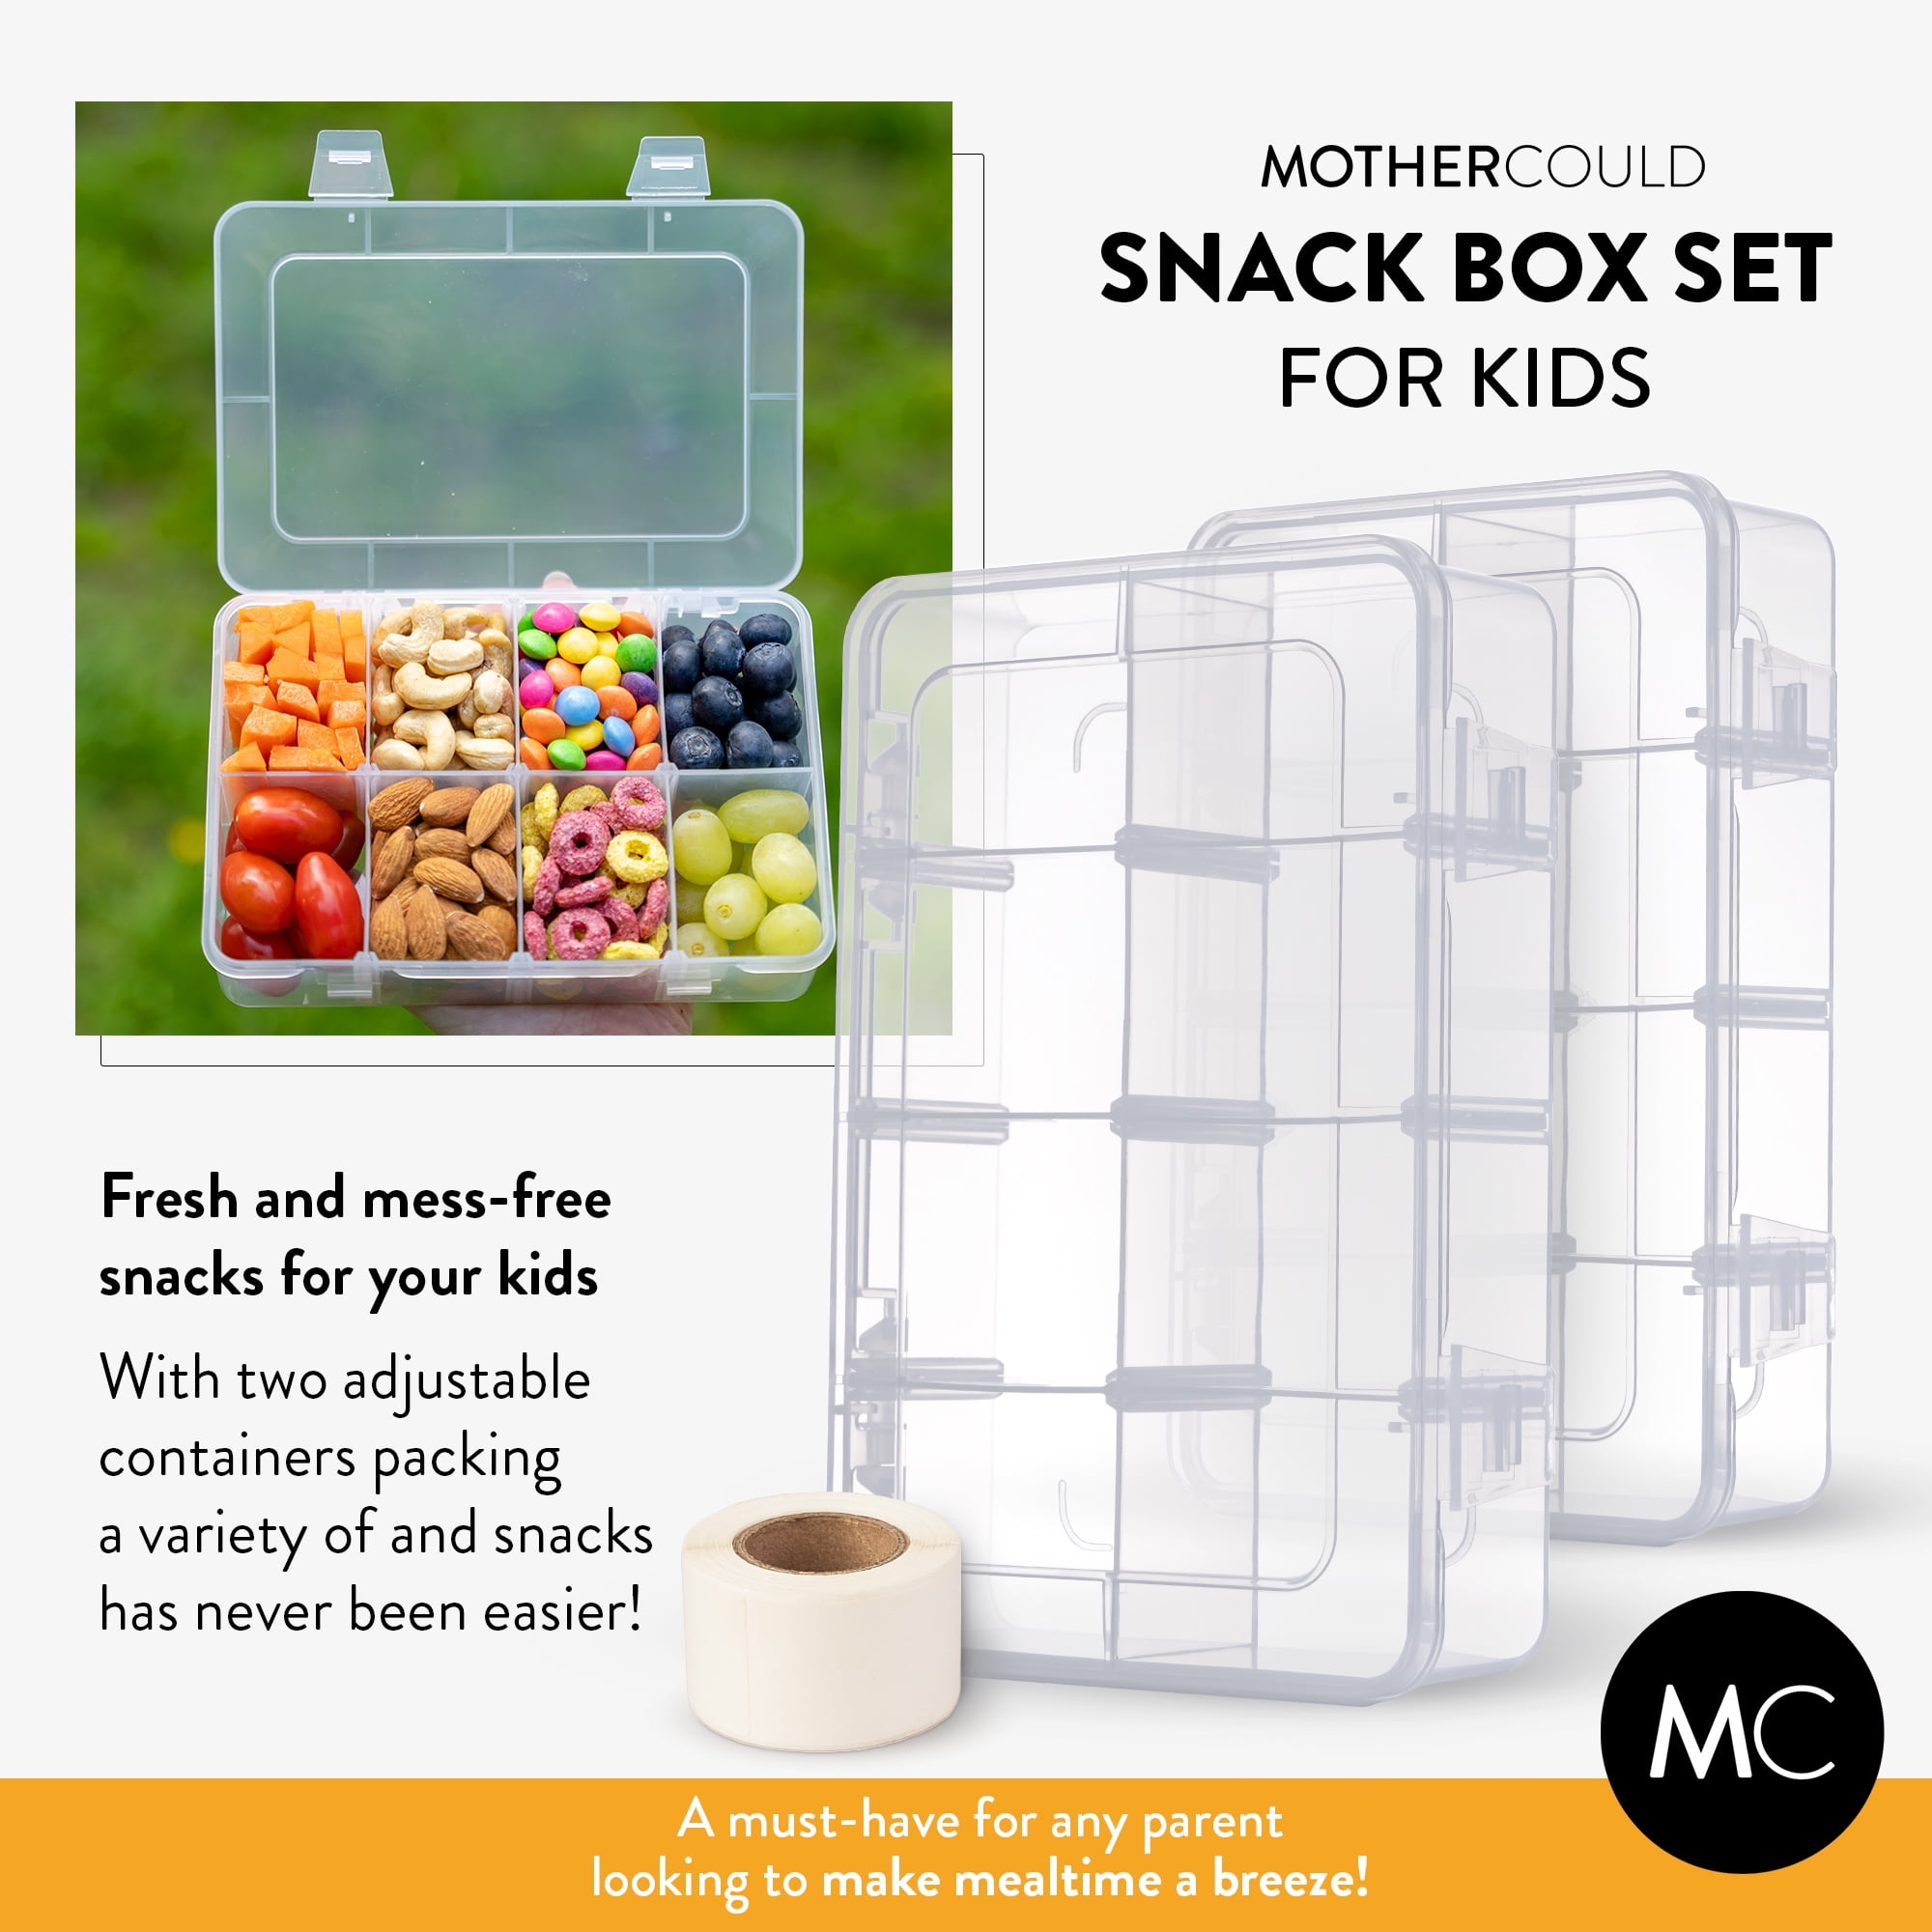 Traveling With Small Children & Babies, Mothercould Snack Boxes